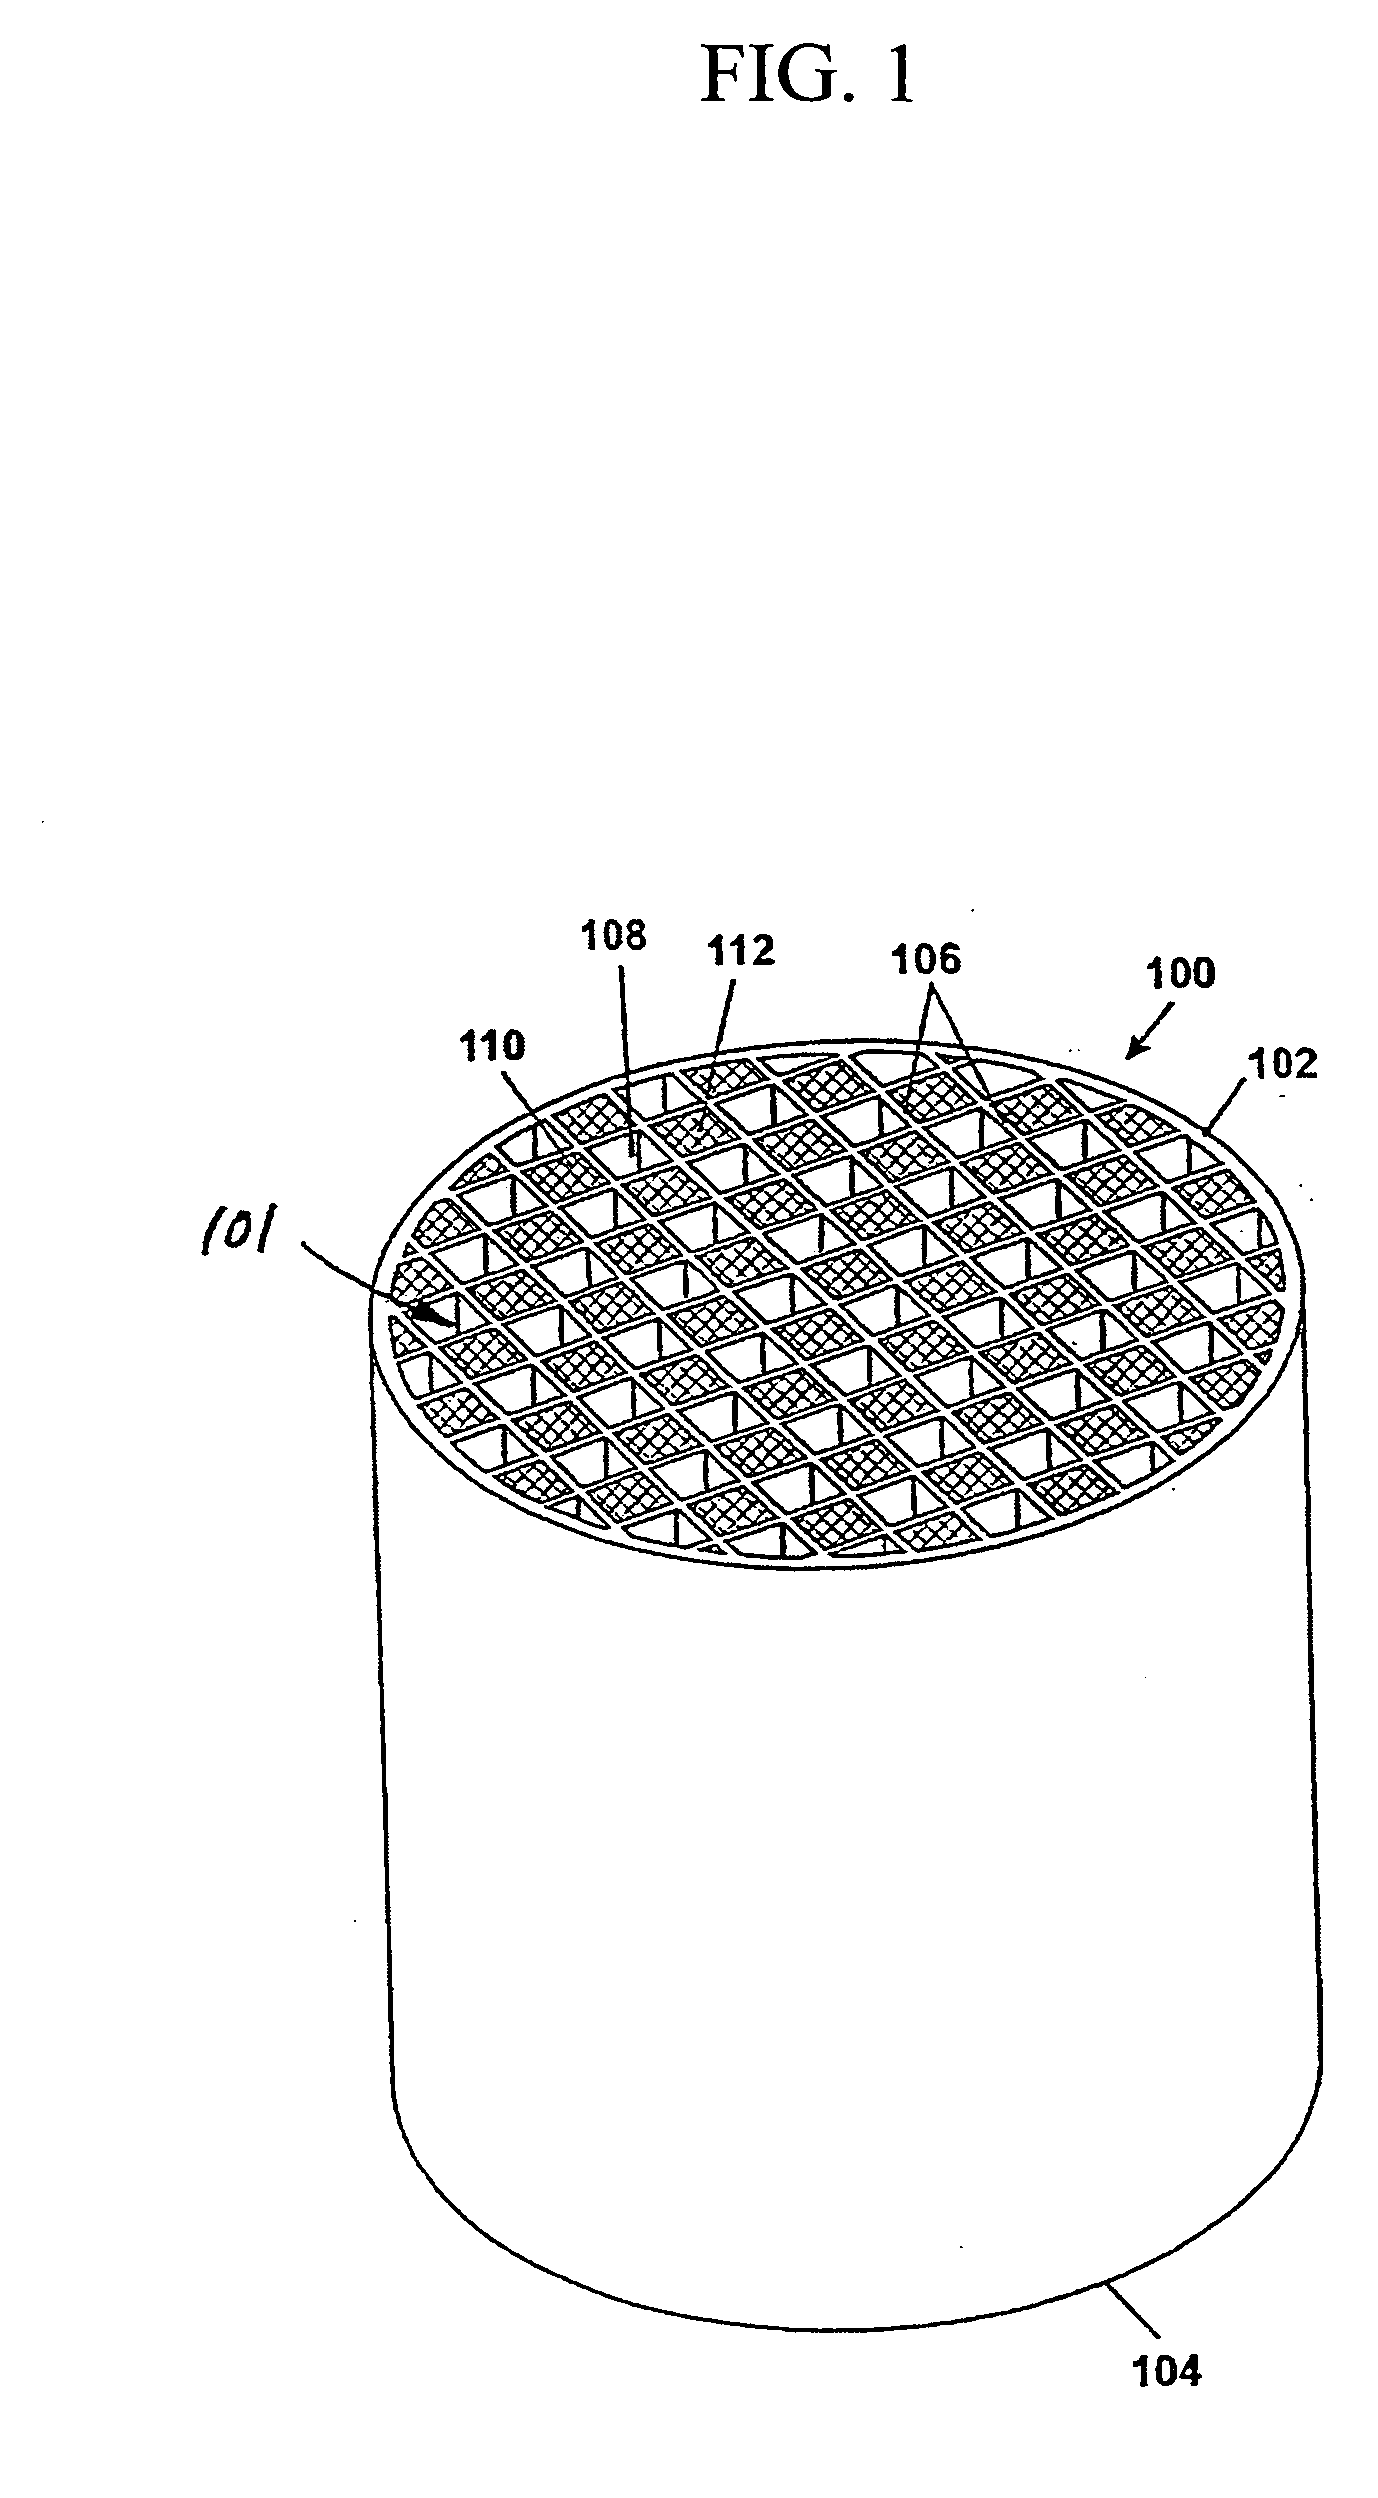 Wall flow reactor for hydrogen production